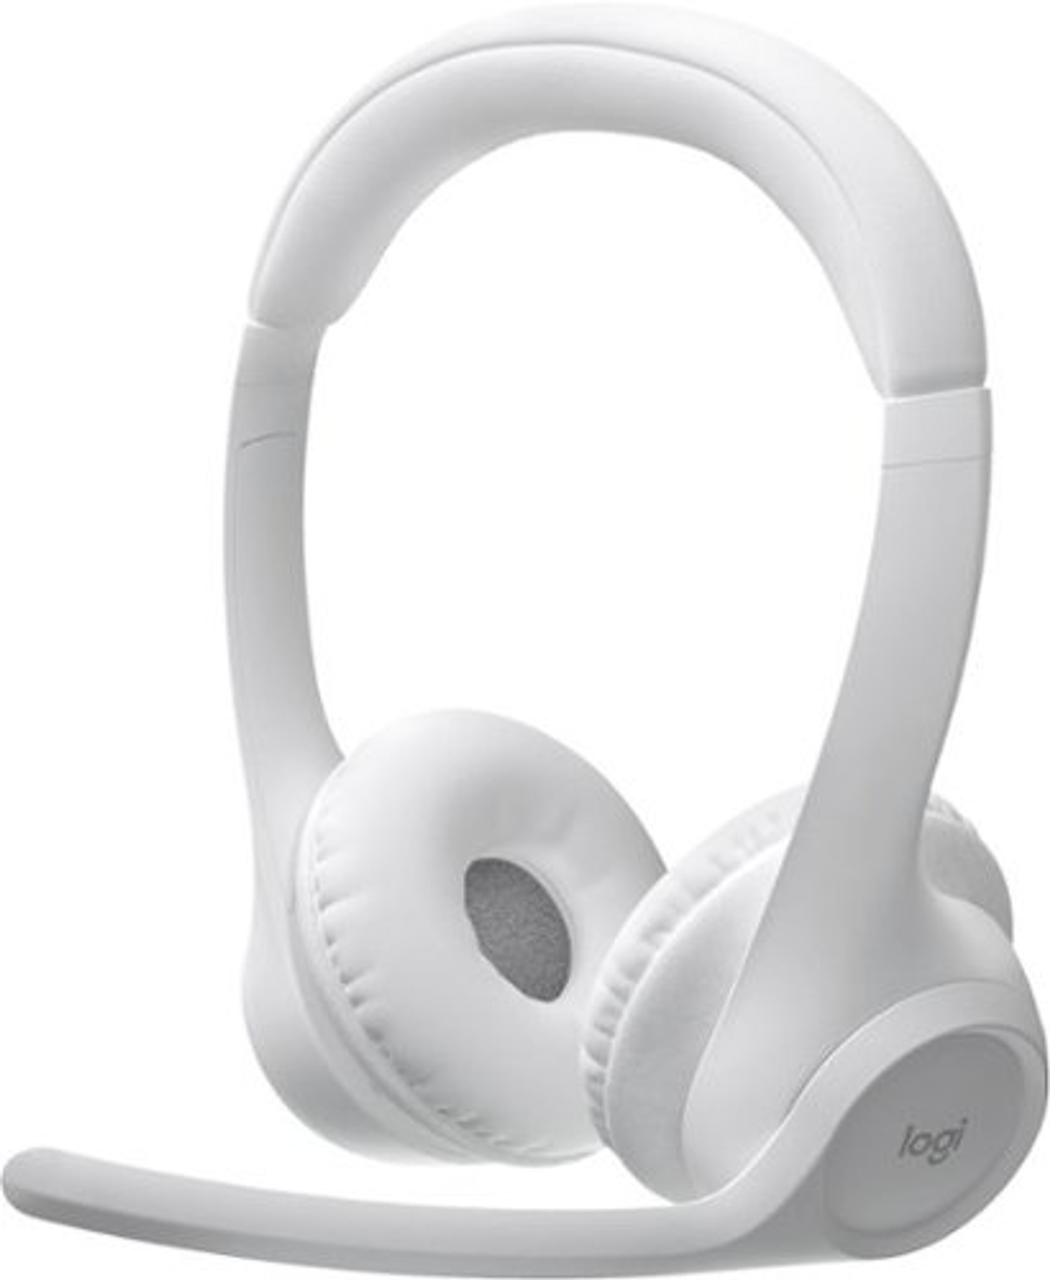 Logitech - Zone 300 Wireless Bluetooth On-ear Headset With Noise-Canceling Microphone - Off-White